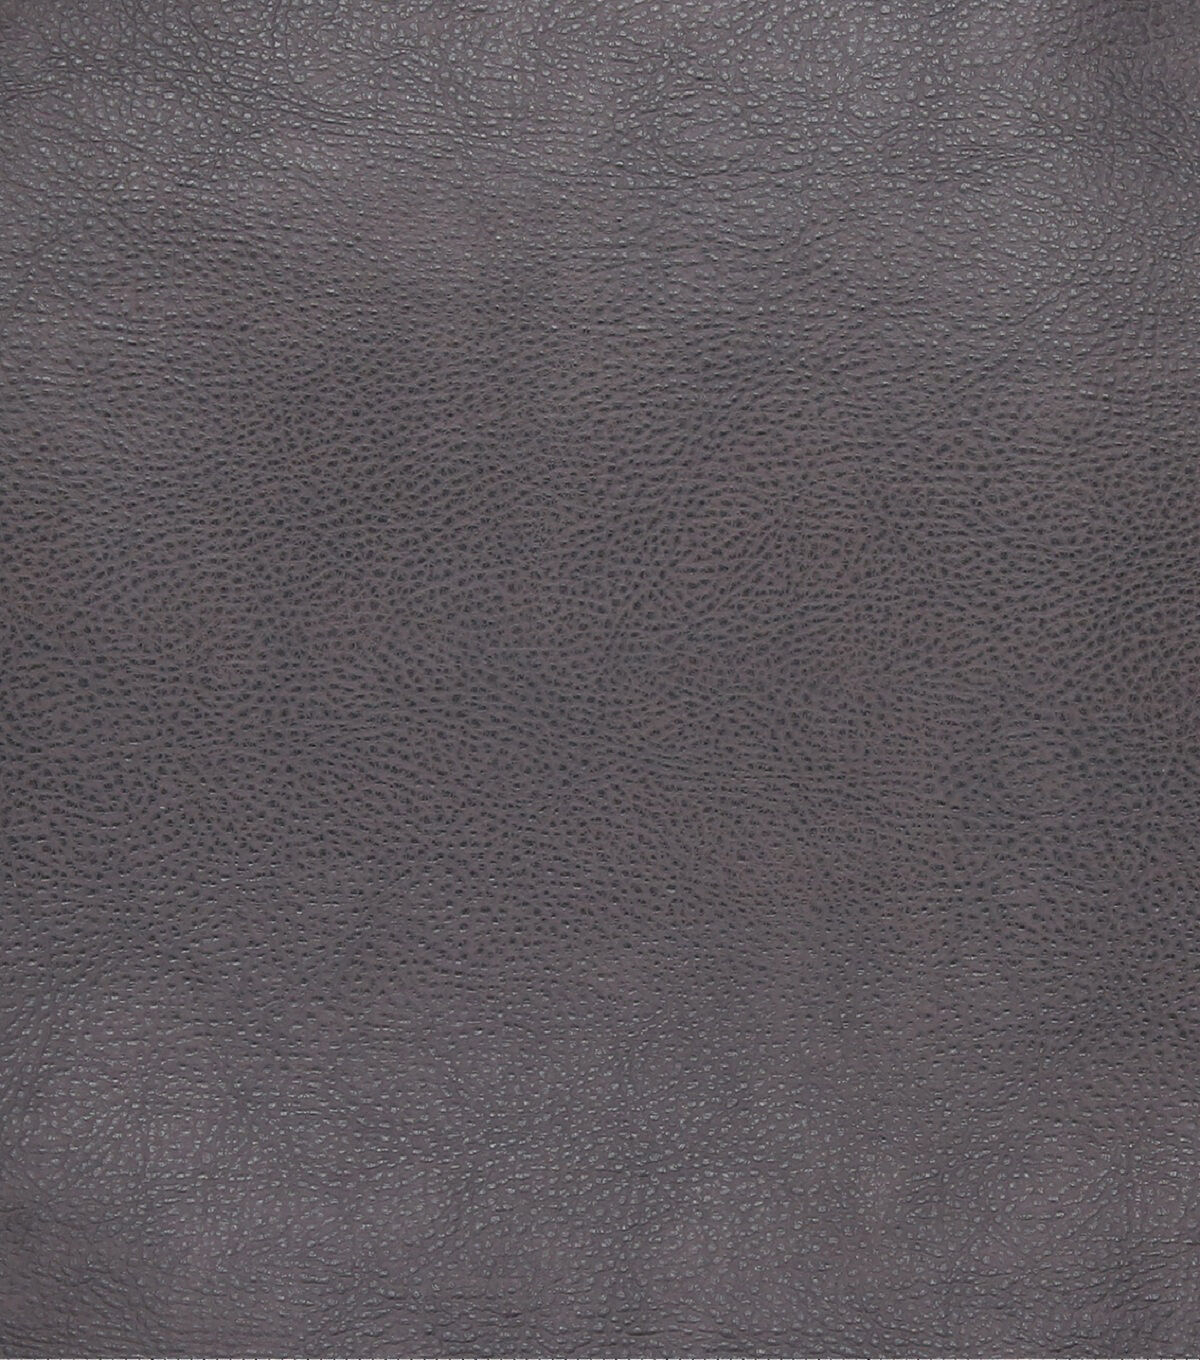 pleather fabric content